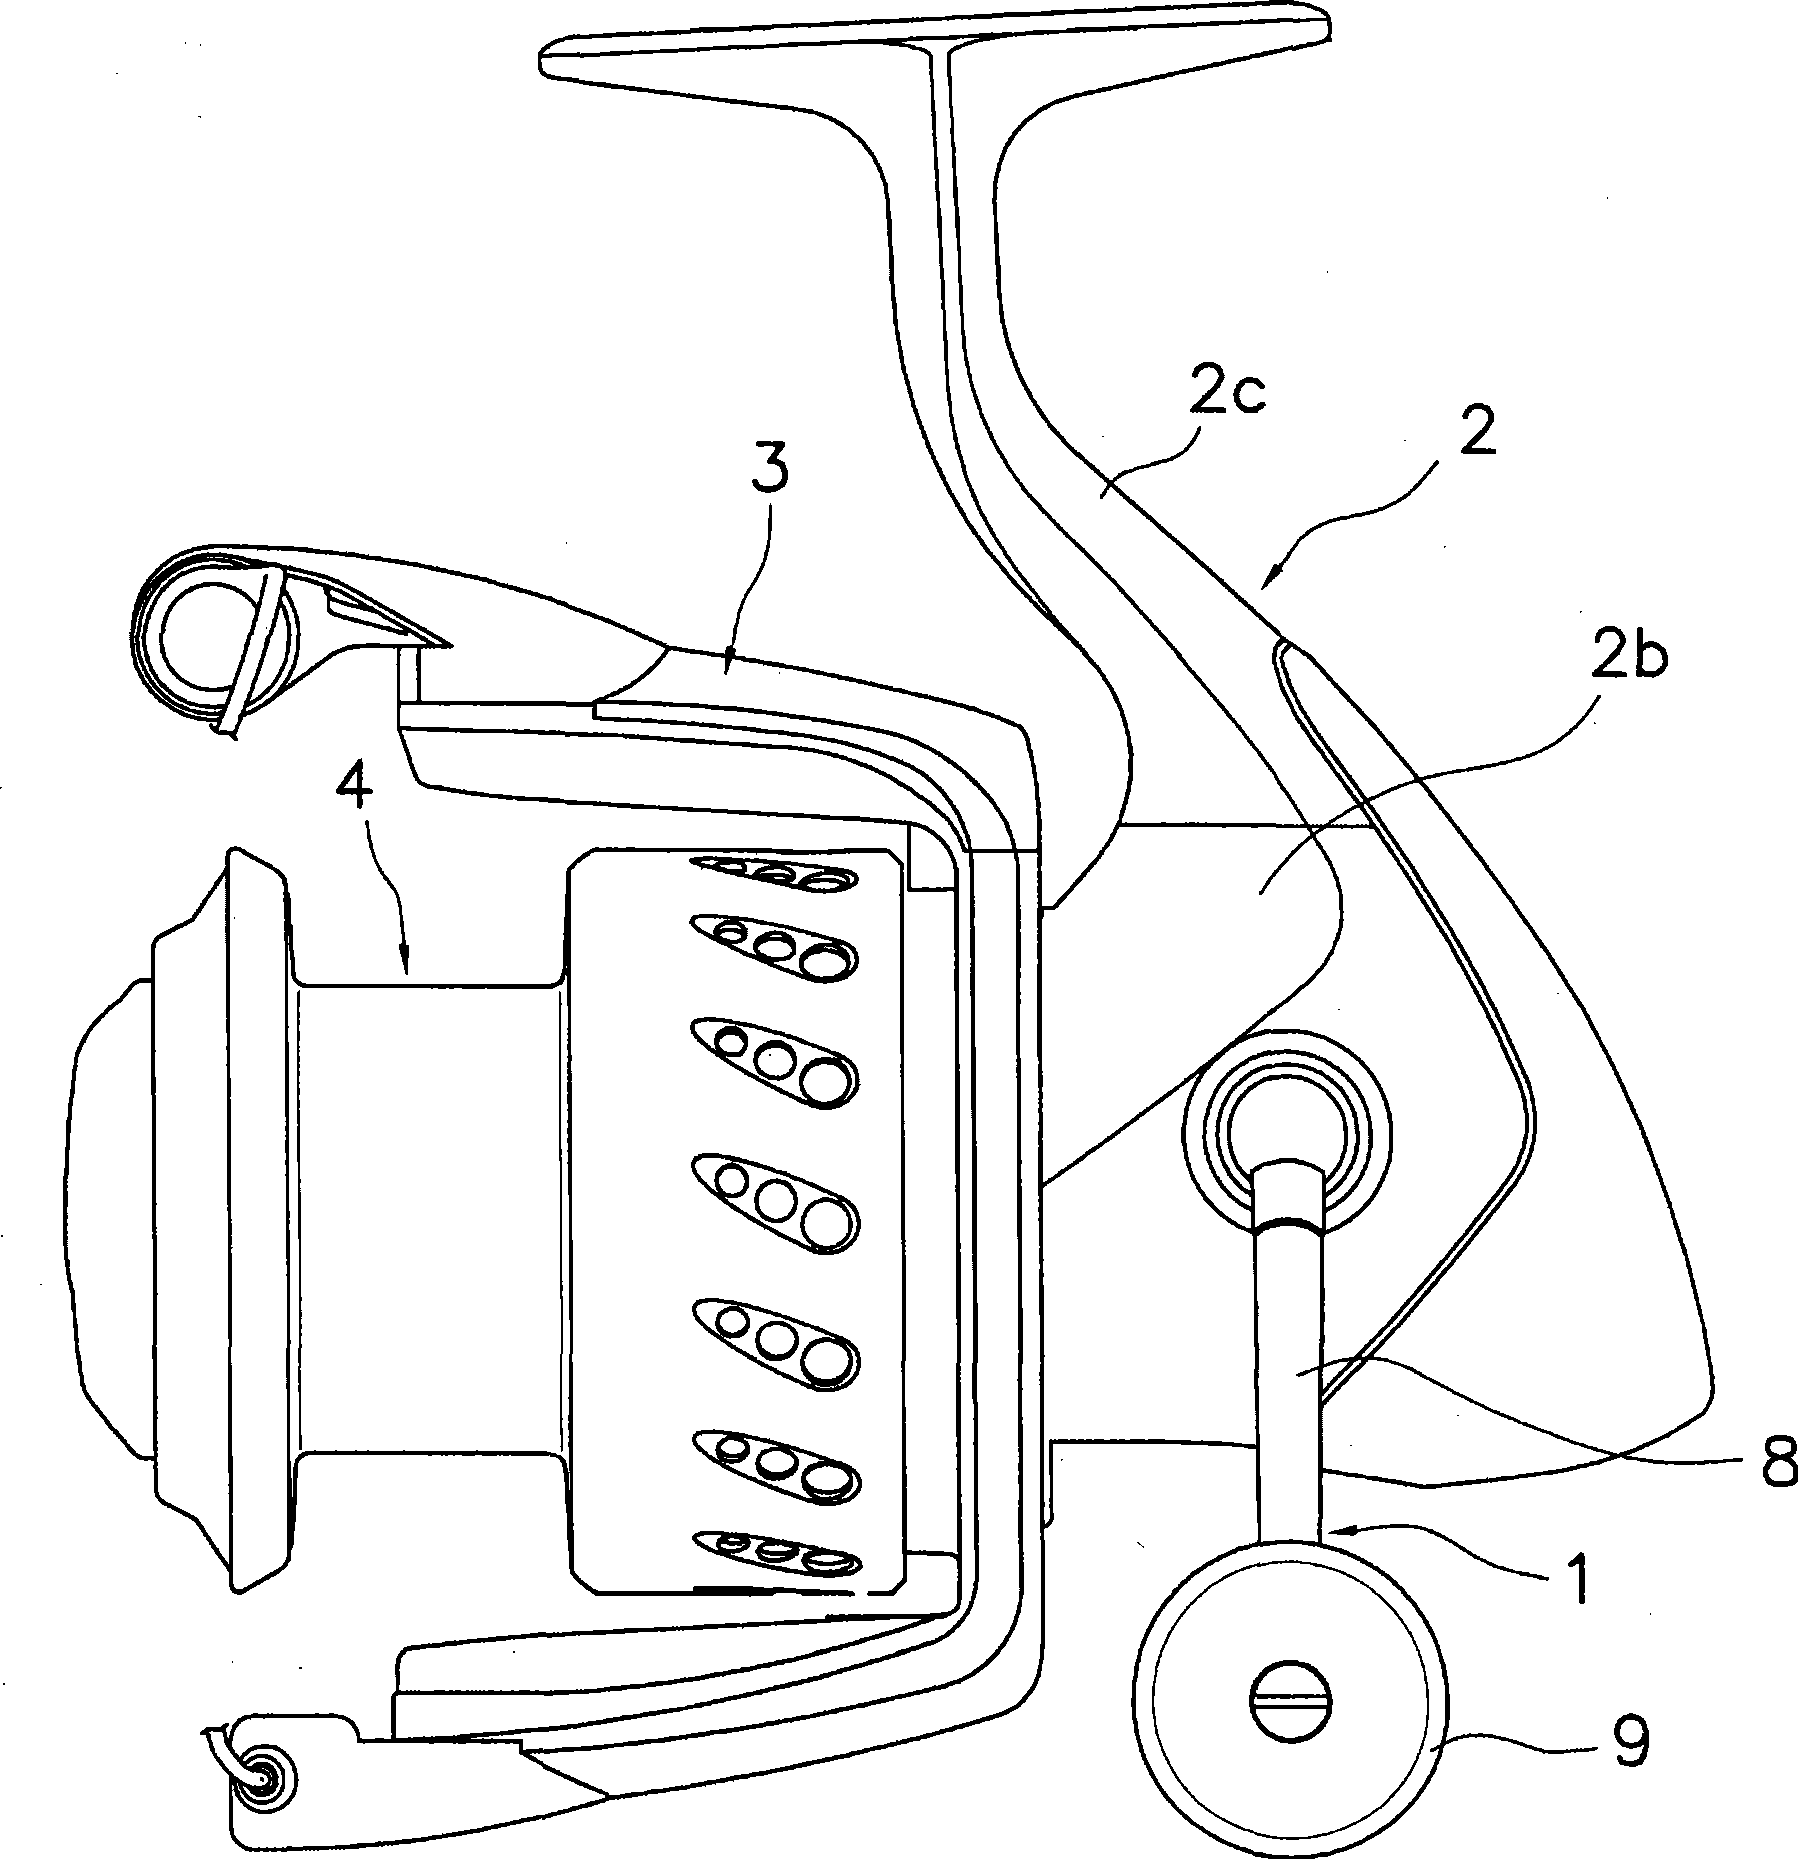 Brake operation button component of spinning reel